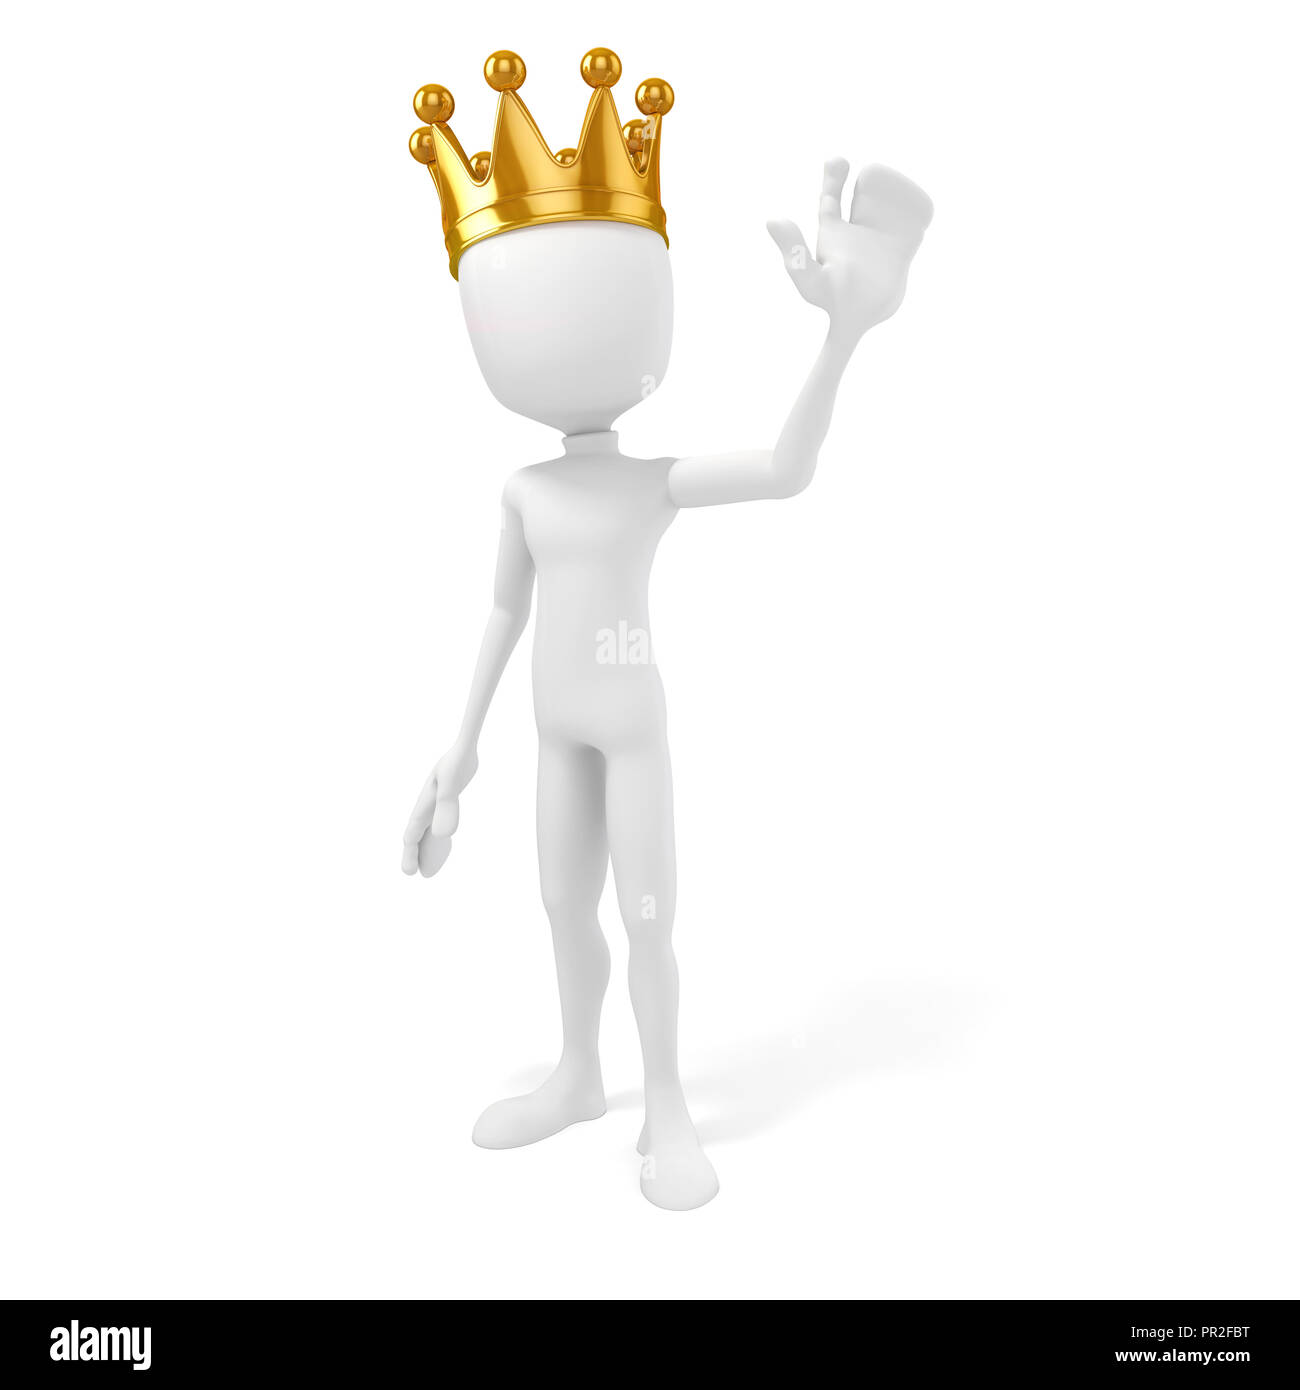 3d man king with a gold crown on white background Stock Photo